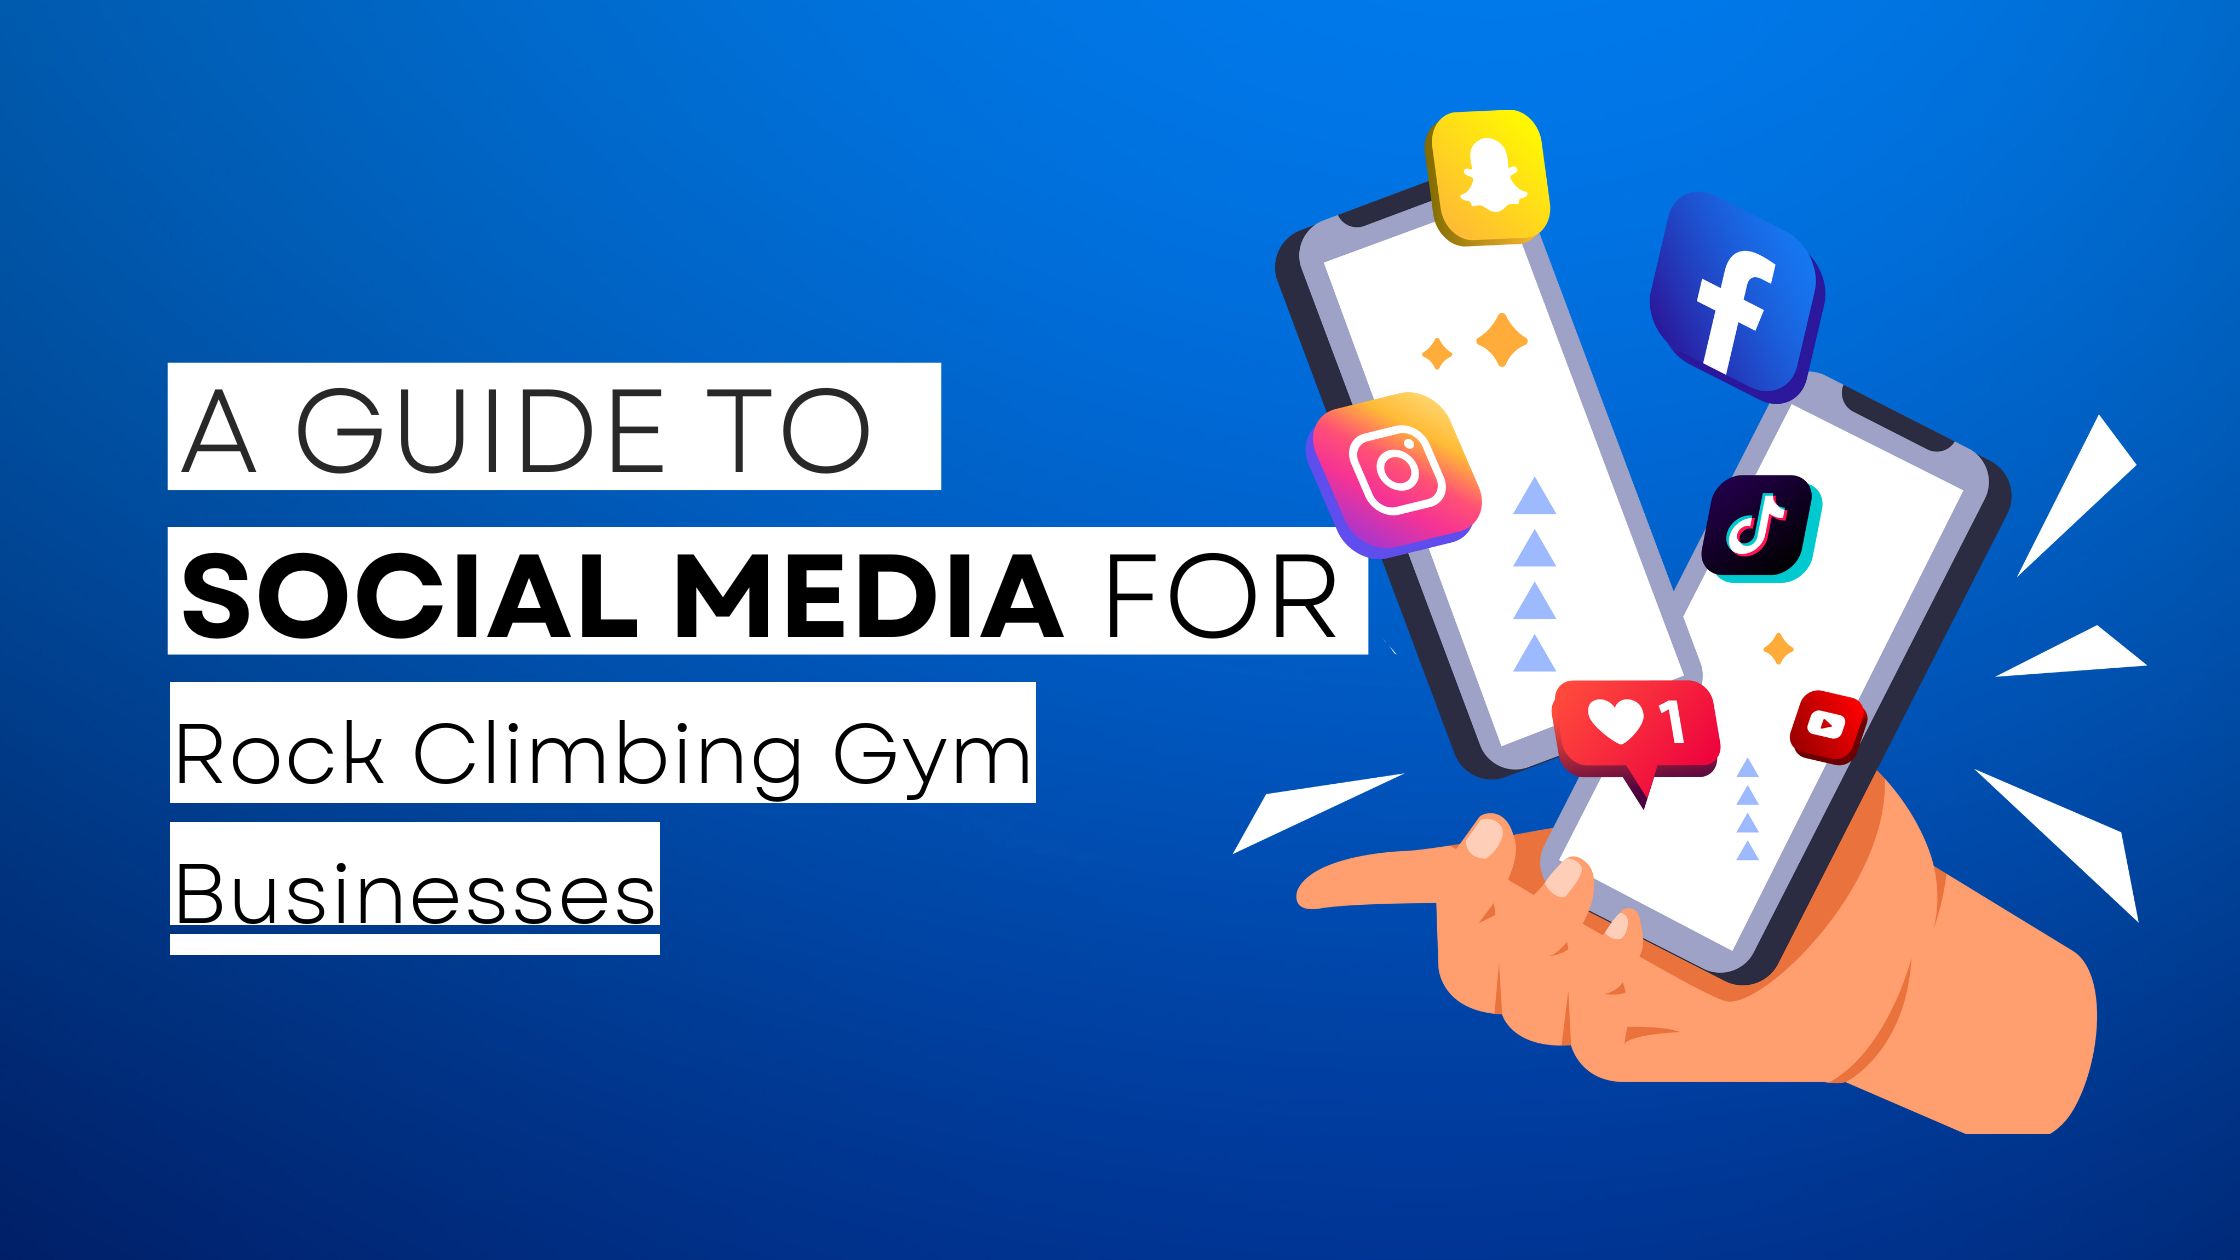 How to start Rock Climbing Gym  on social media